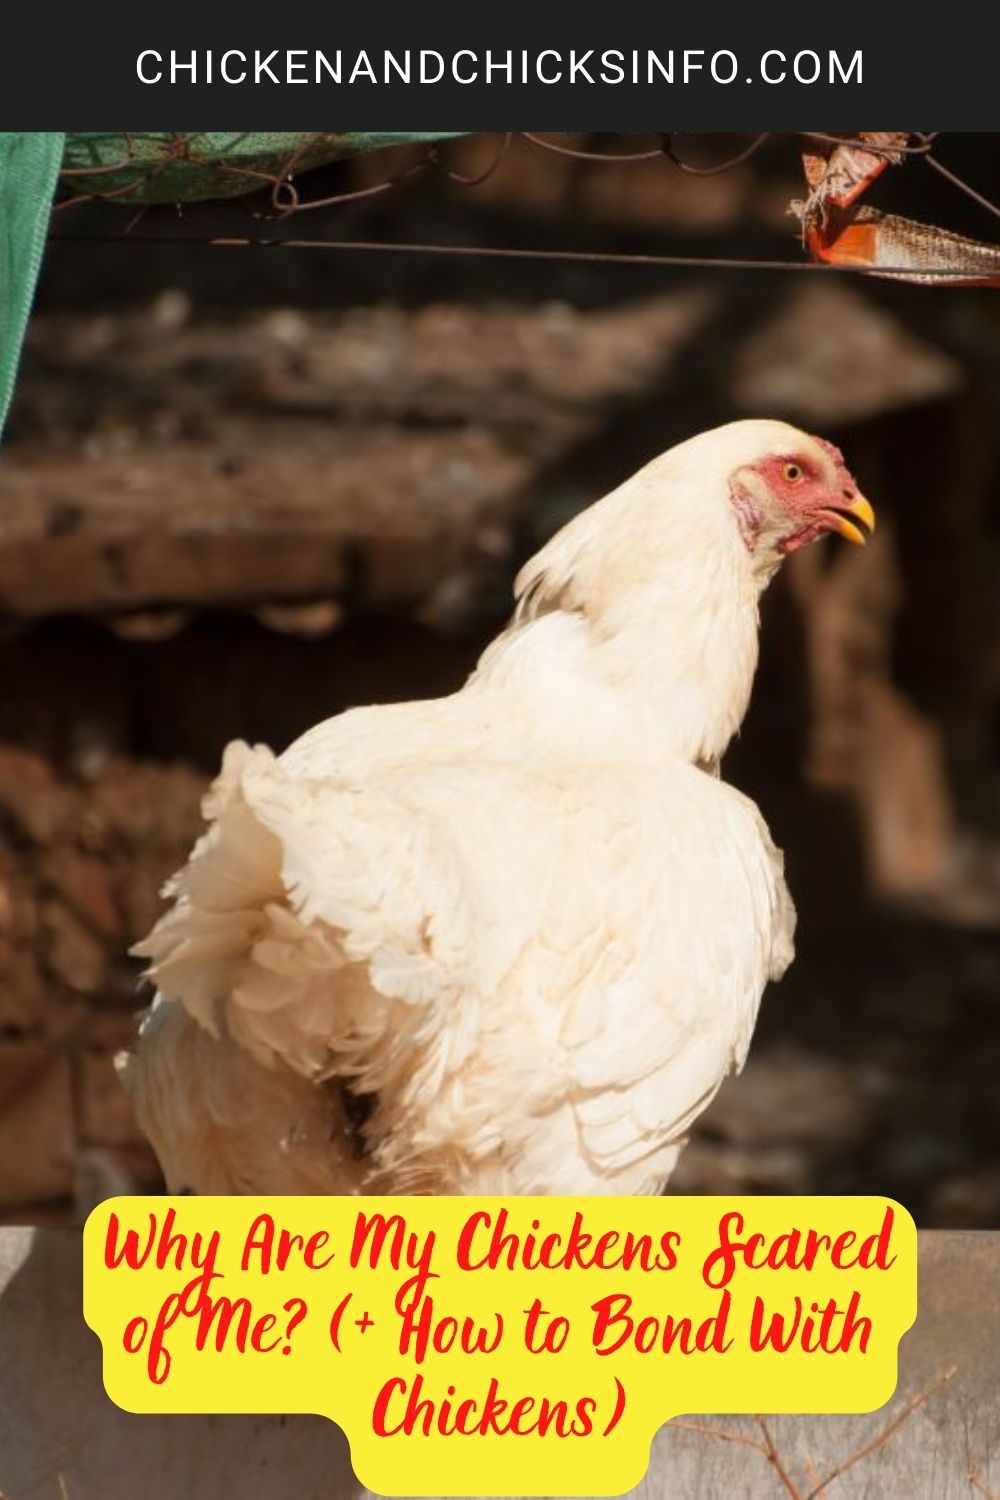 Why Are My Chickens Scared of Me? (+ How to Bond With Chickens) poster.
